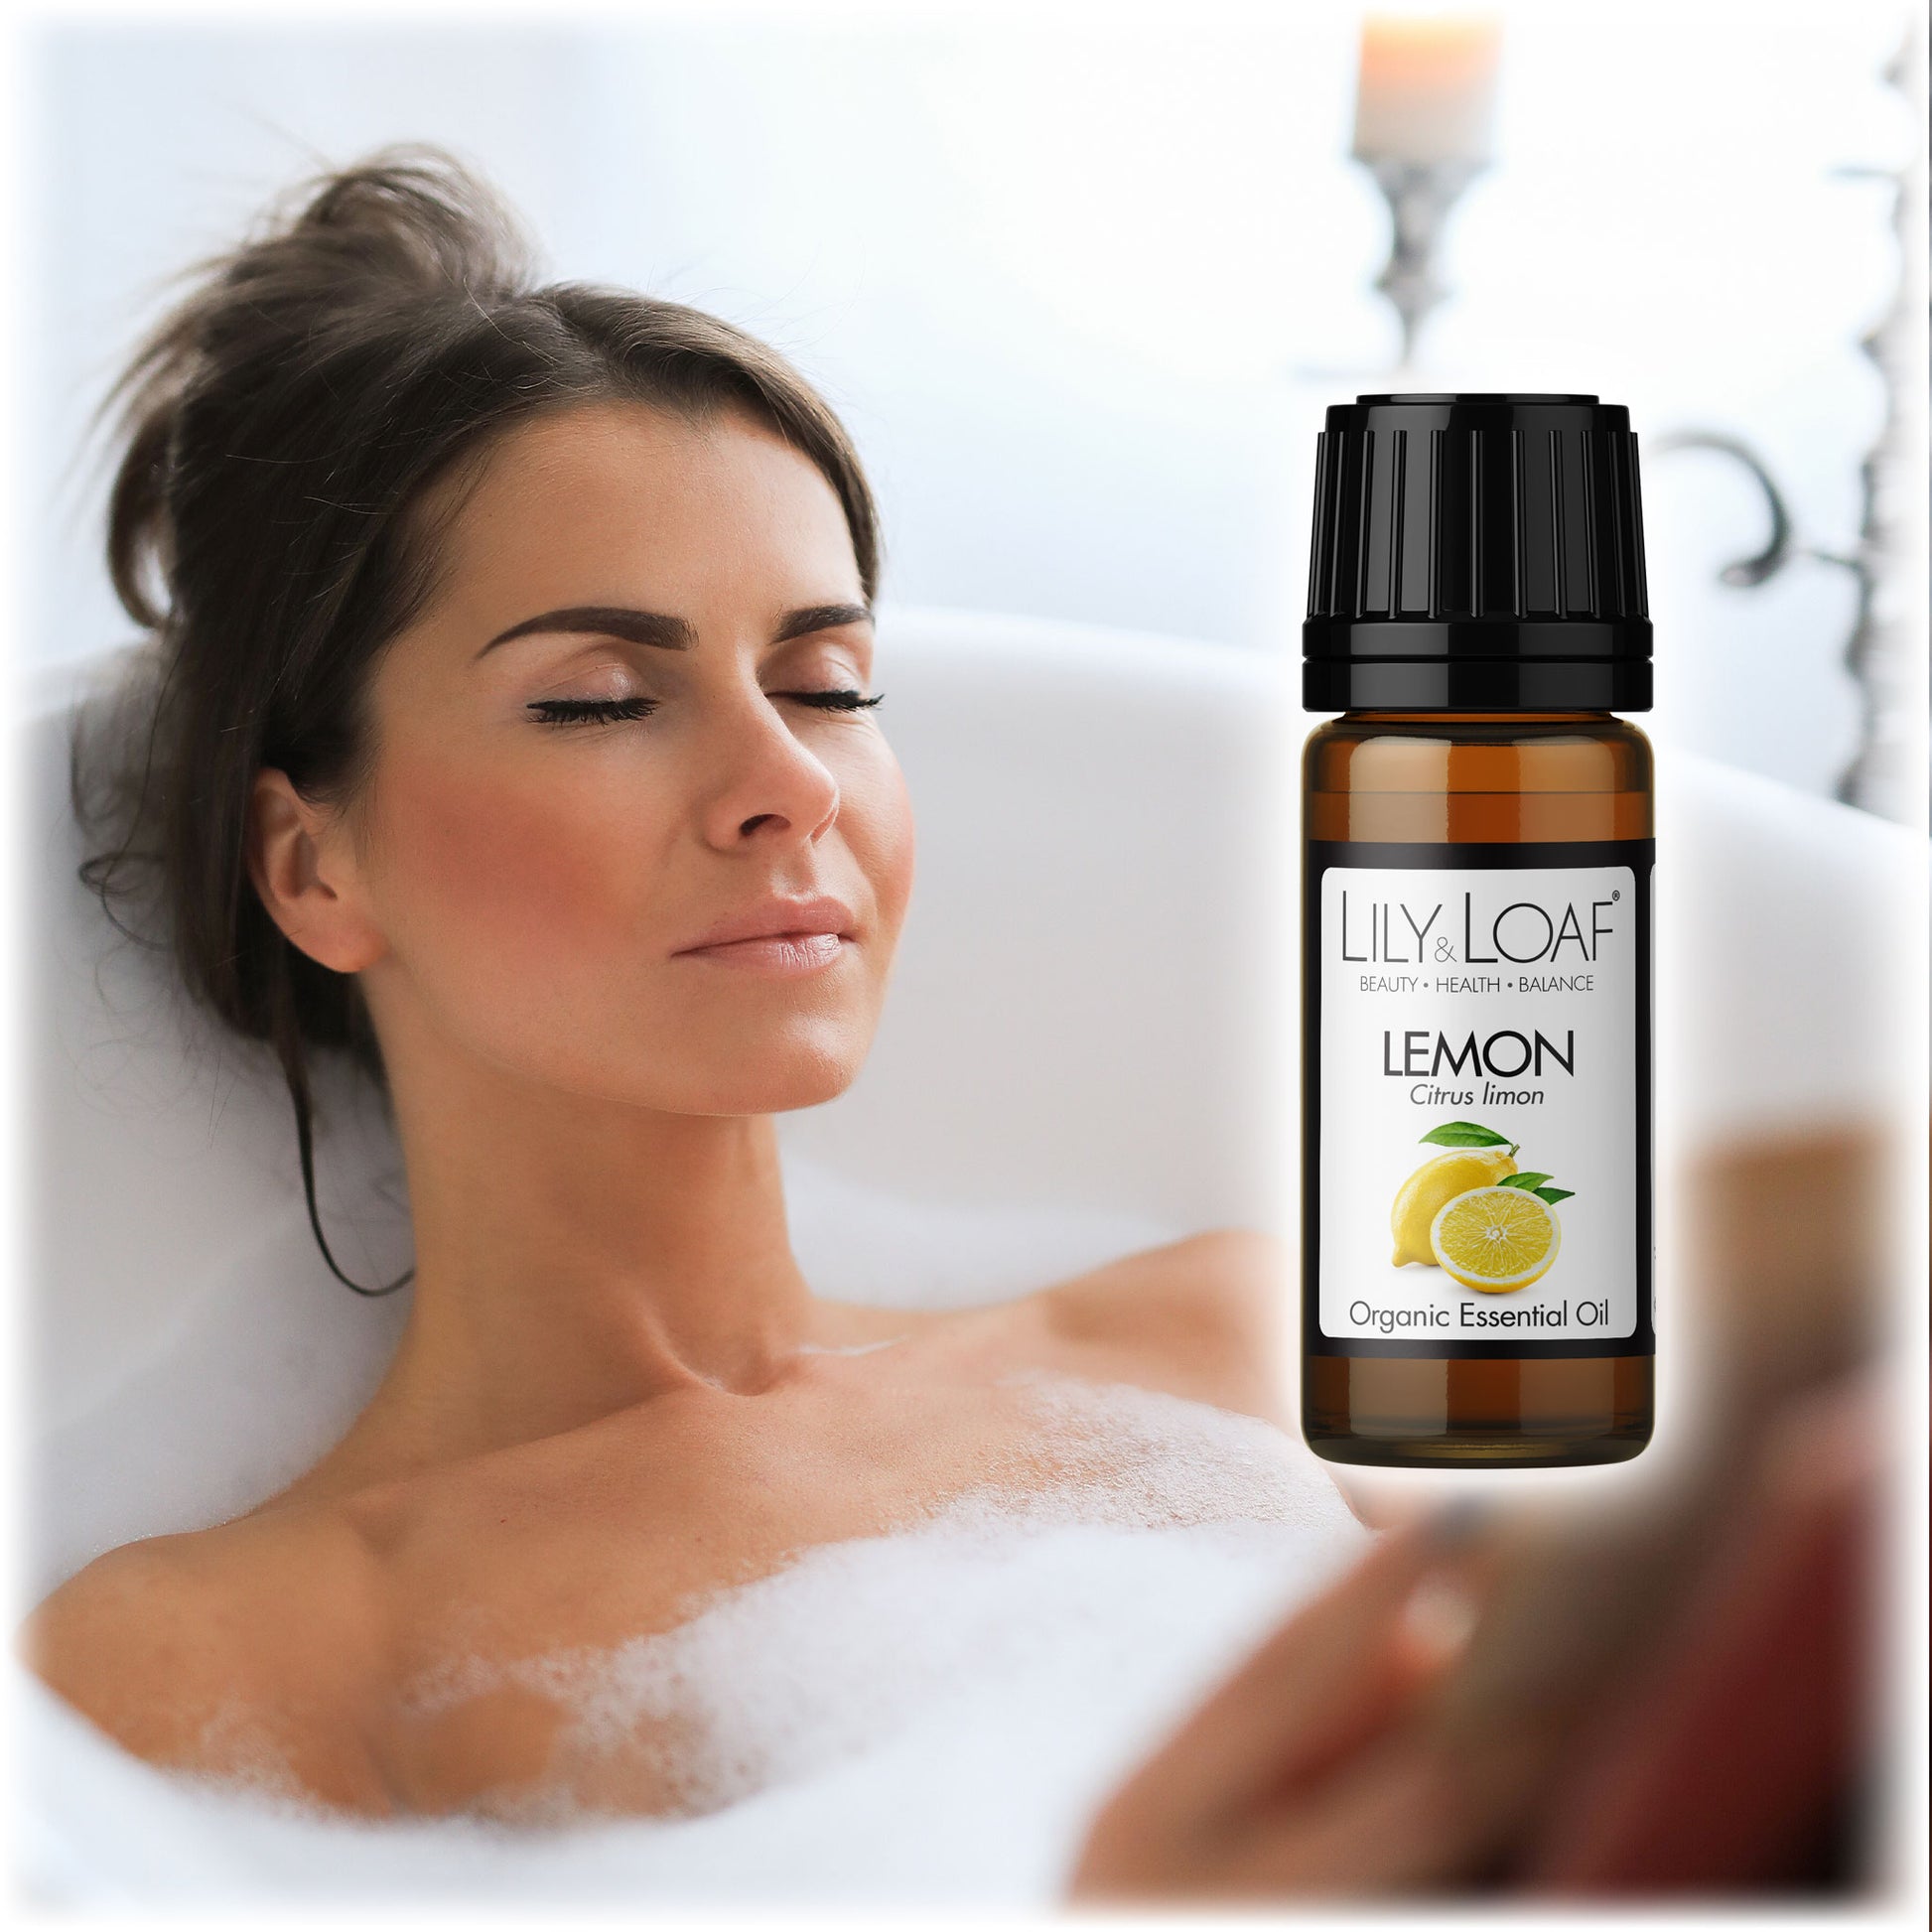 Lily & Loaf Organic Lemon Essential Oil bottle, featuring Citrus limon for its refreshing and uplifting properties.